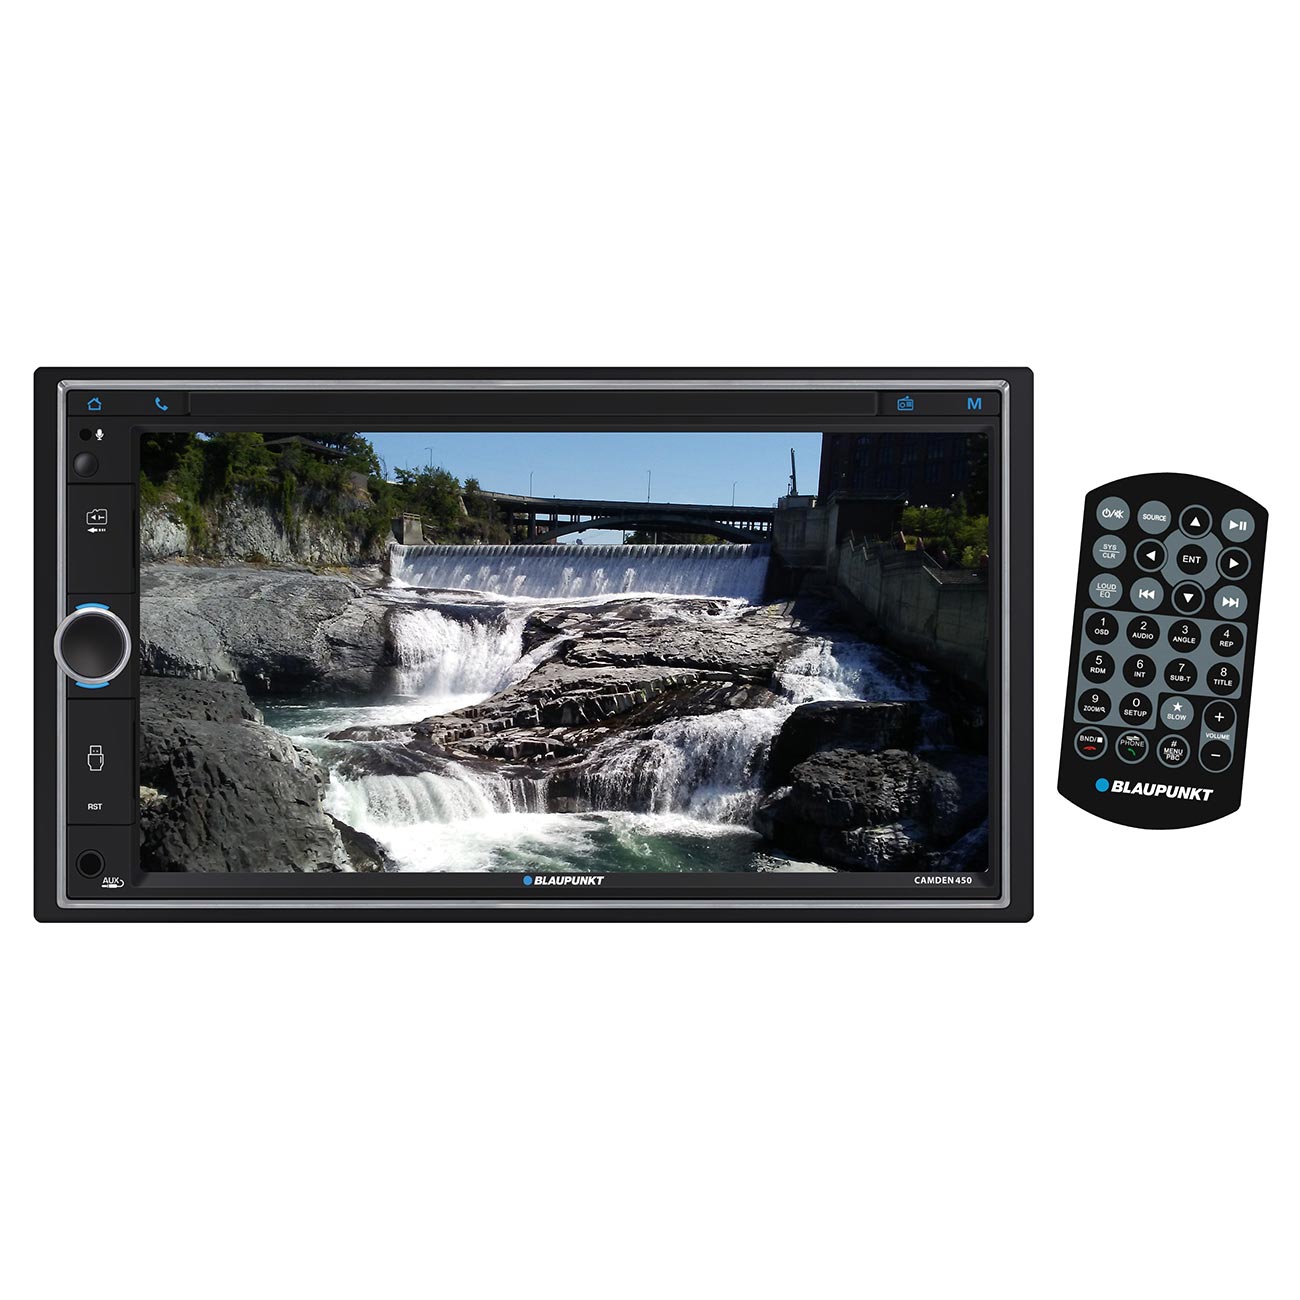 Blaupunkt 6.95" Double DIN Fixed Face Touchscreen DVD Receiver with Bluetooth USB/SD Inputs and Rem